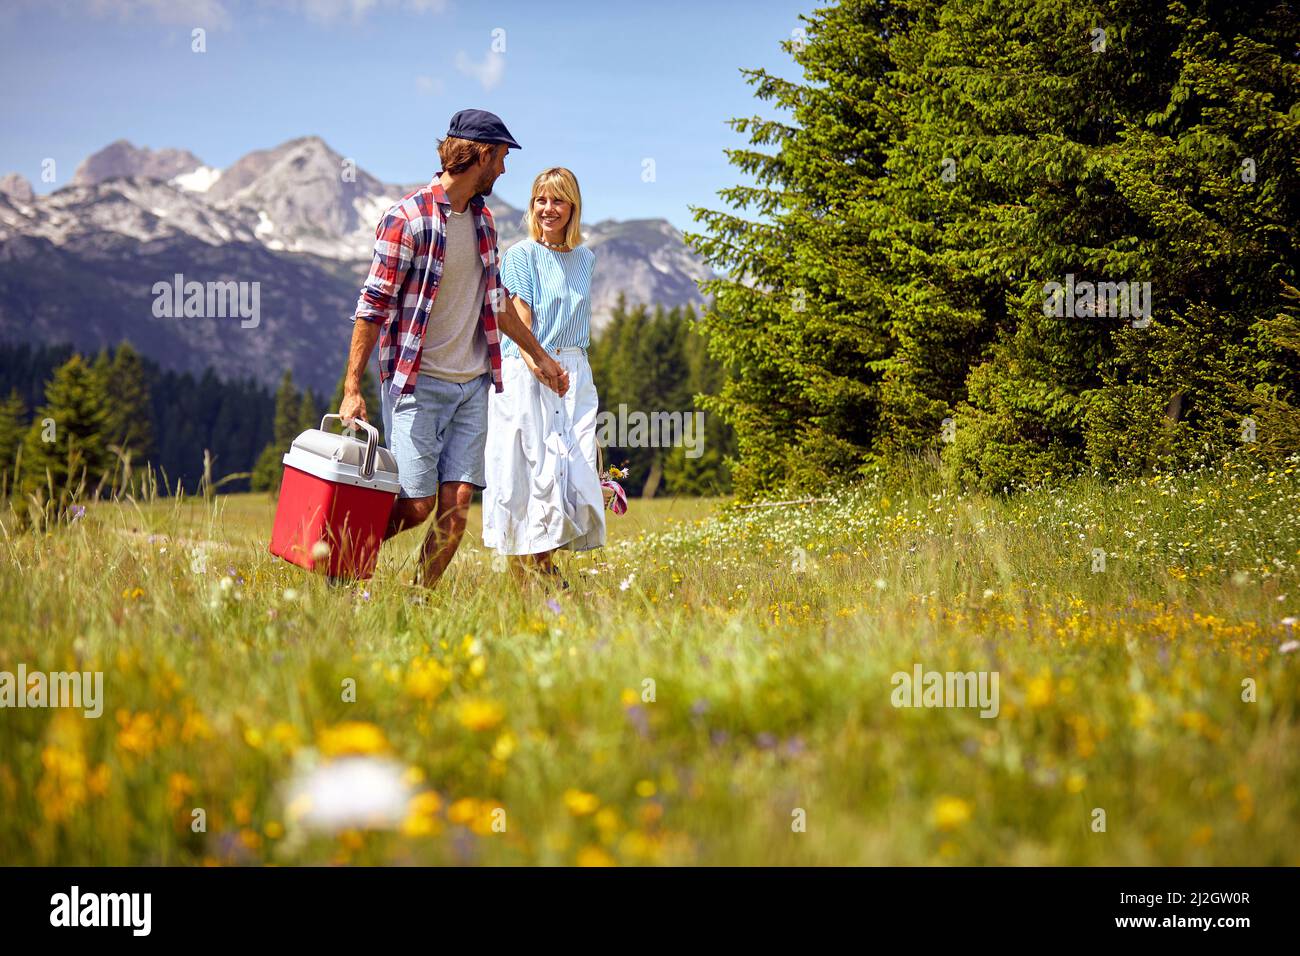 Young cheerful smiling man and woman in love holding hands and walking in nature on a beautiful  day. Stock Photo